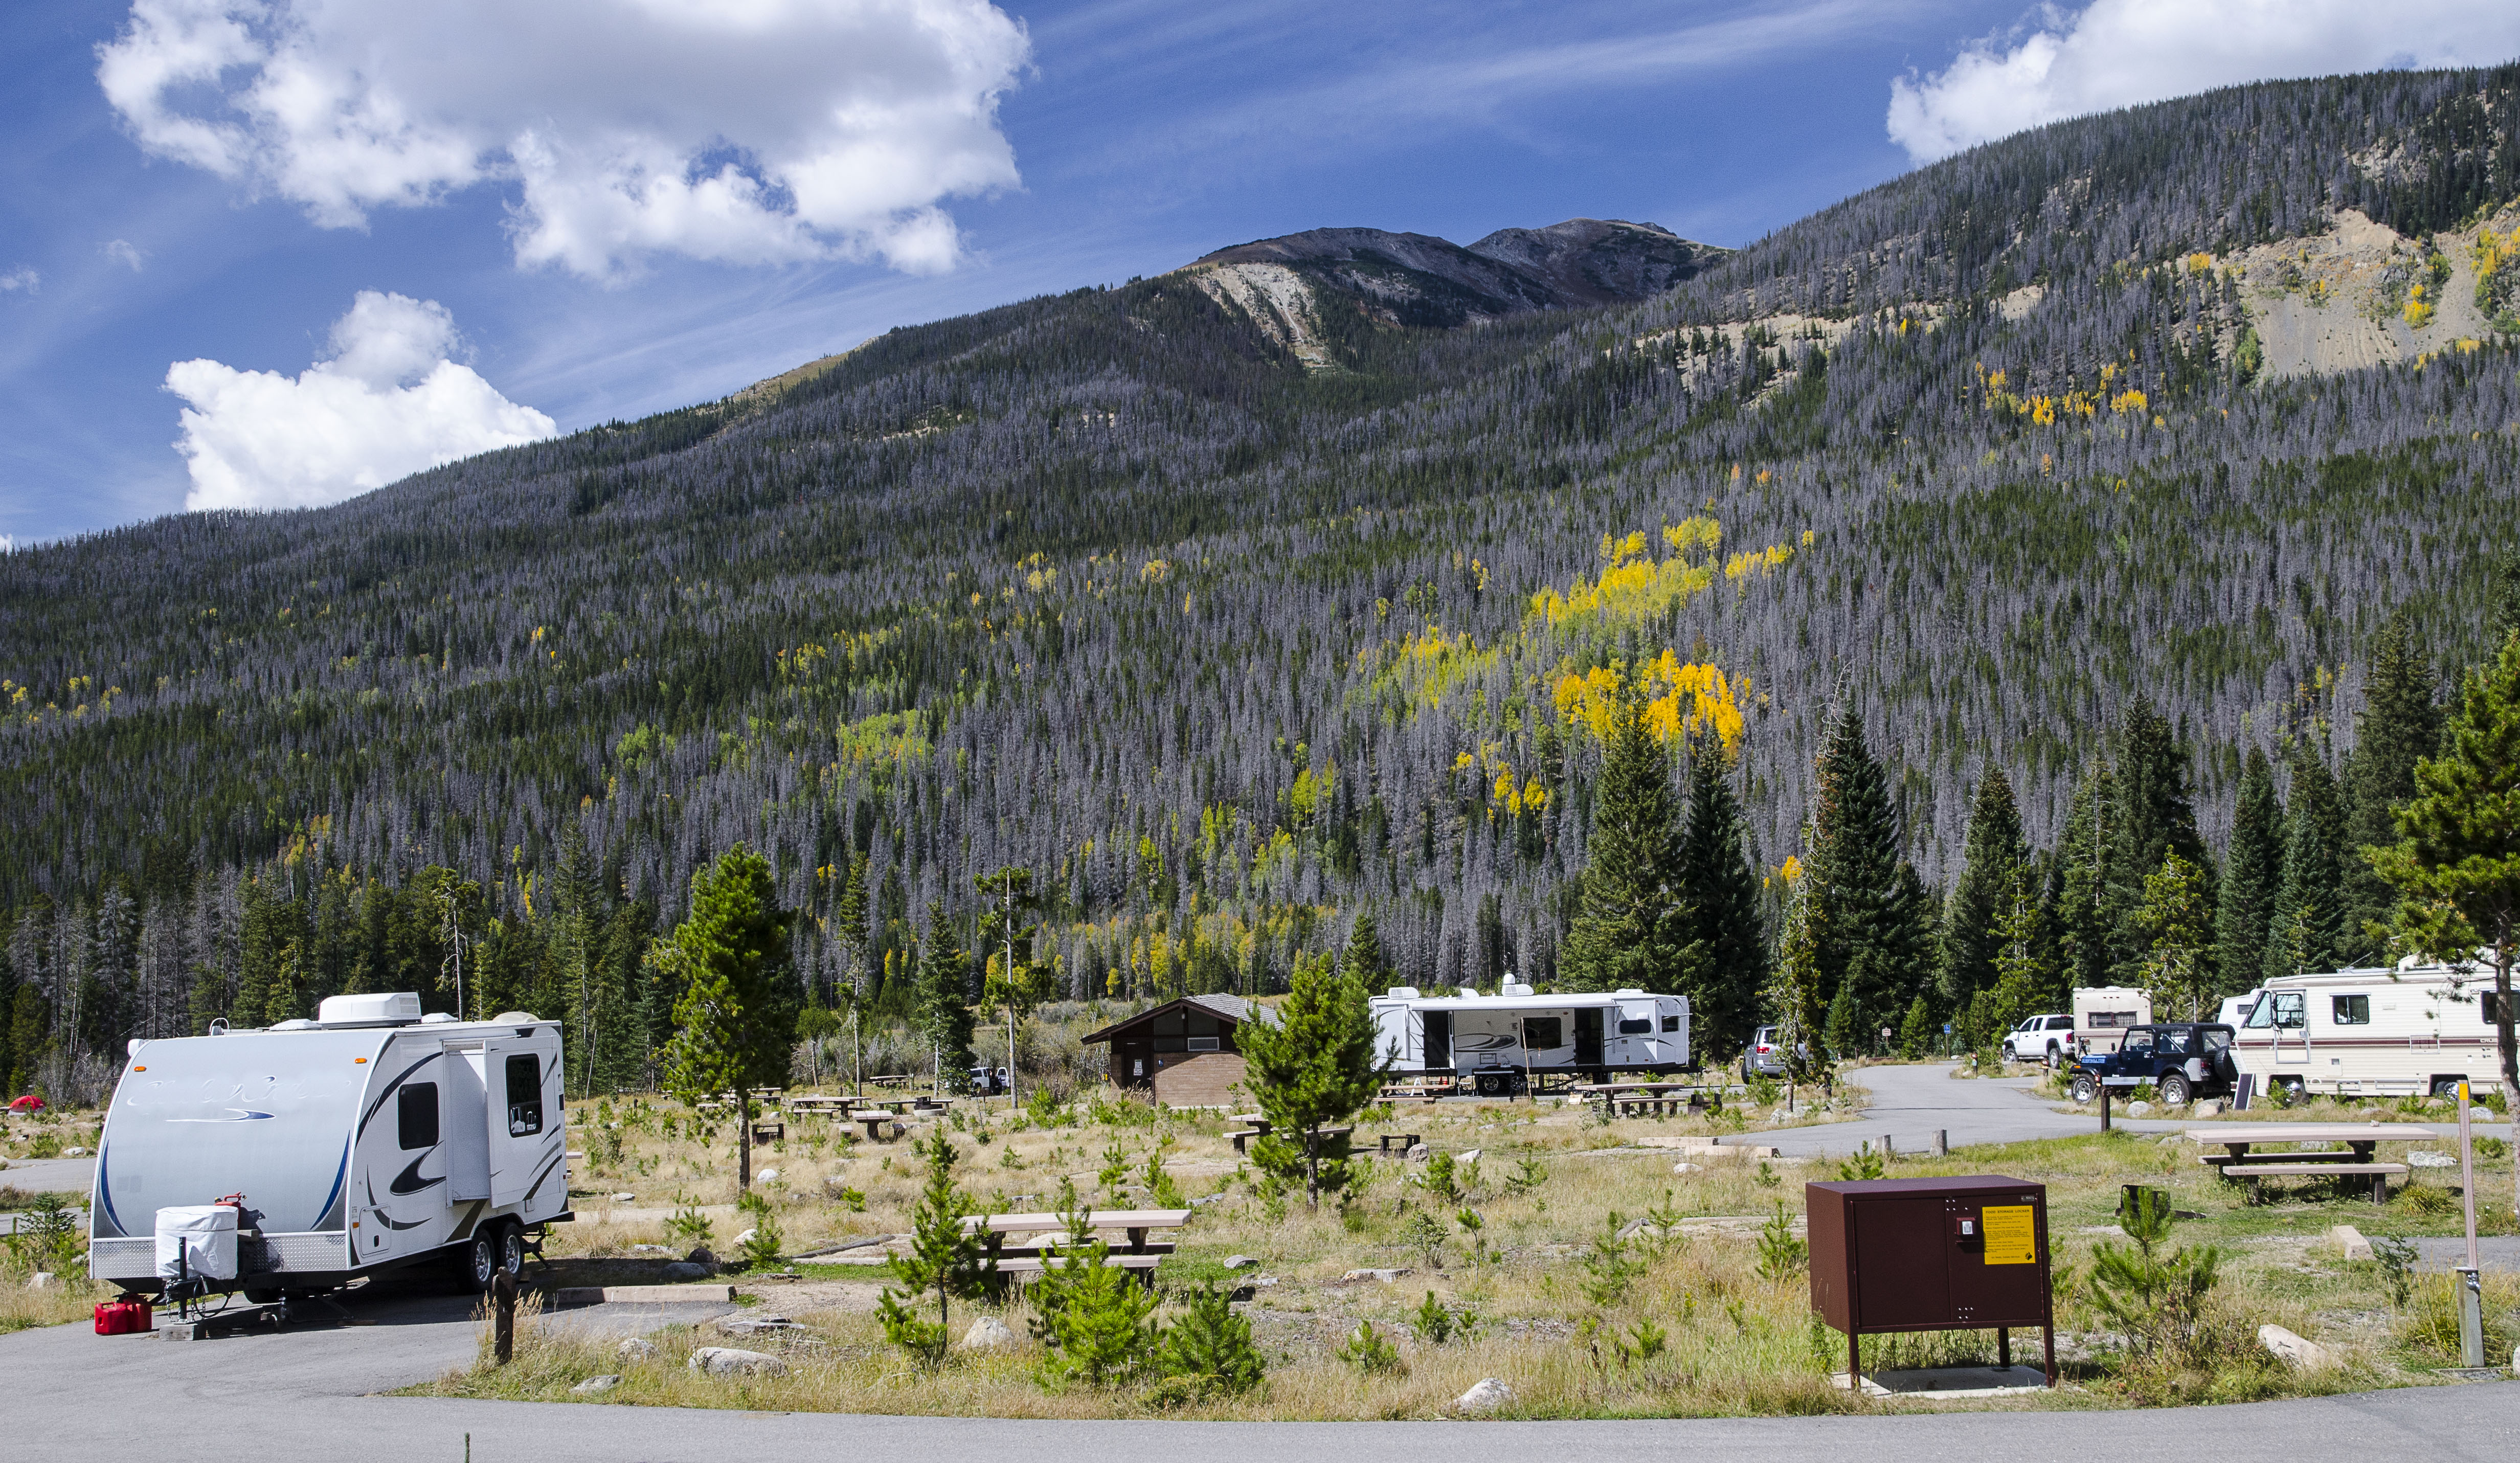 RVs are set up in Timber Creek Campground